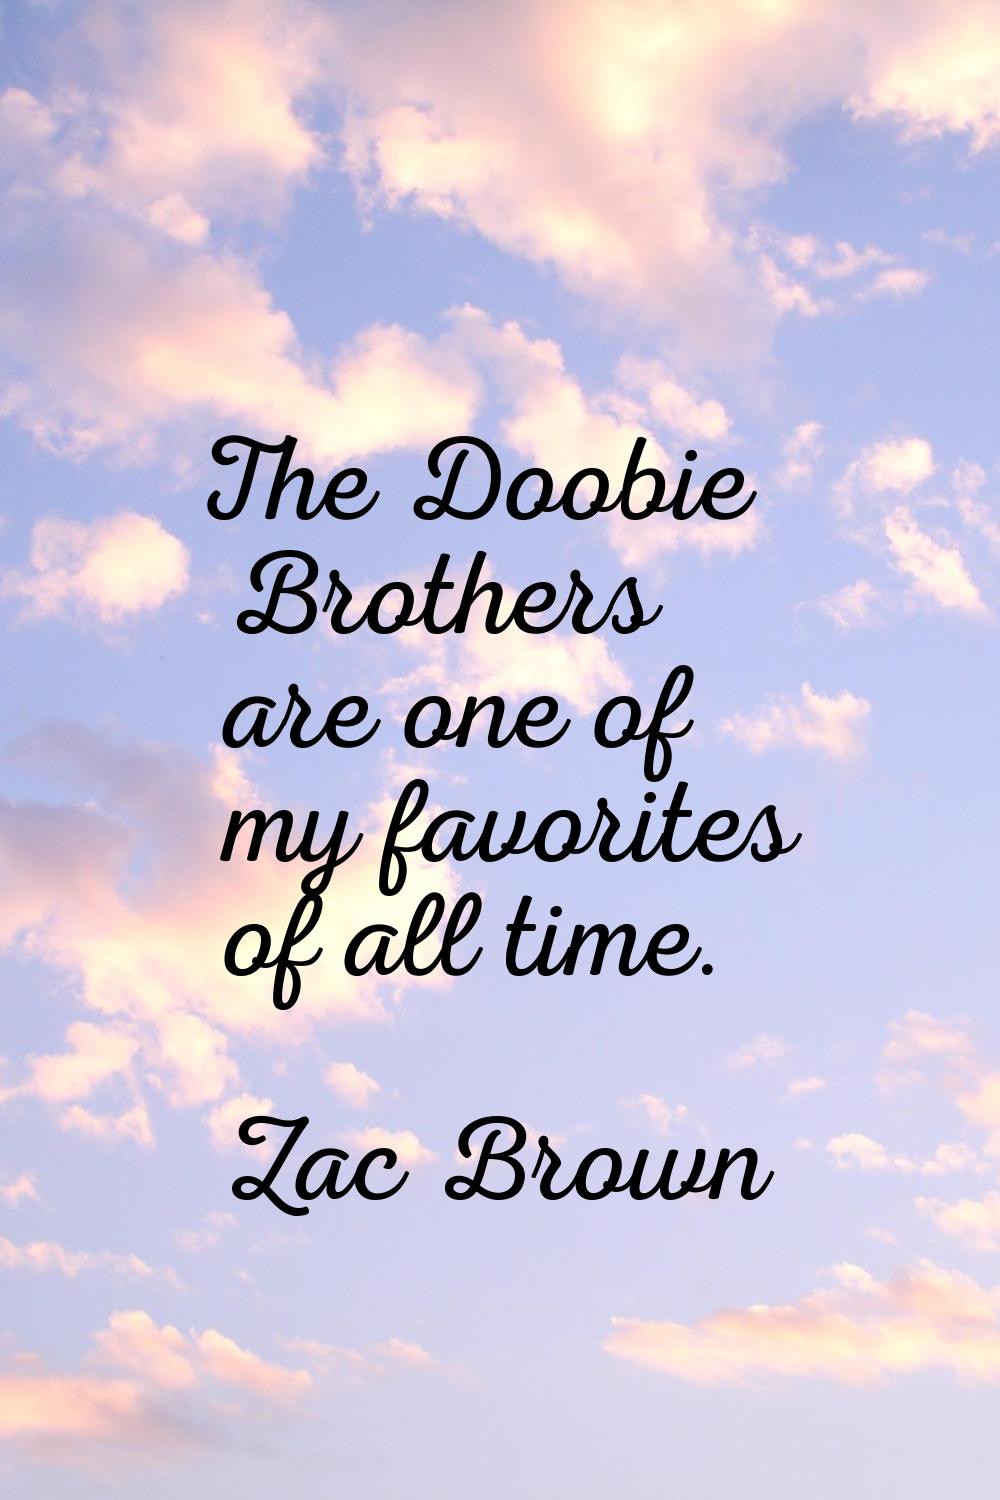 The Doobie Brothers are one of my favorites of all time.